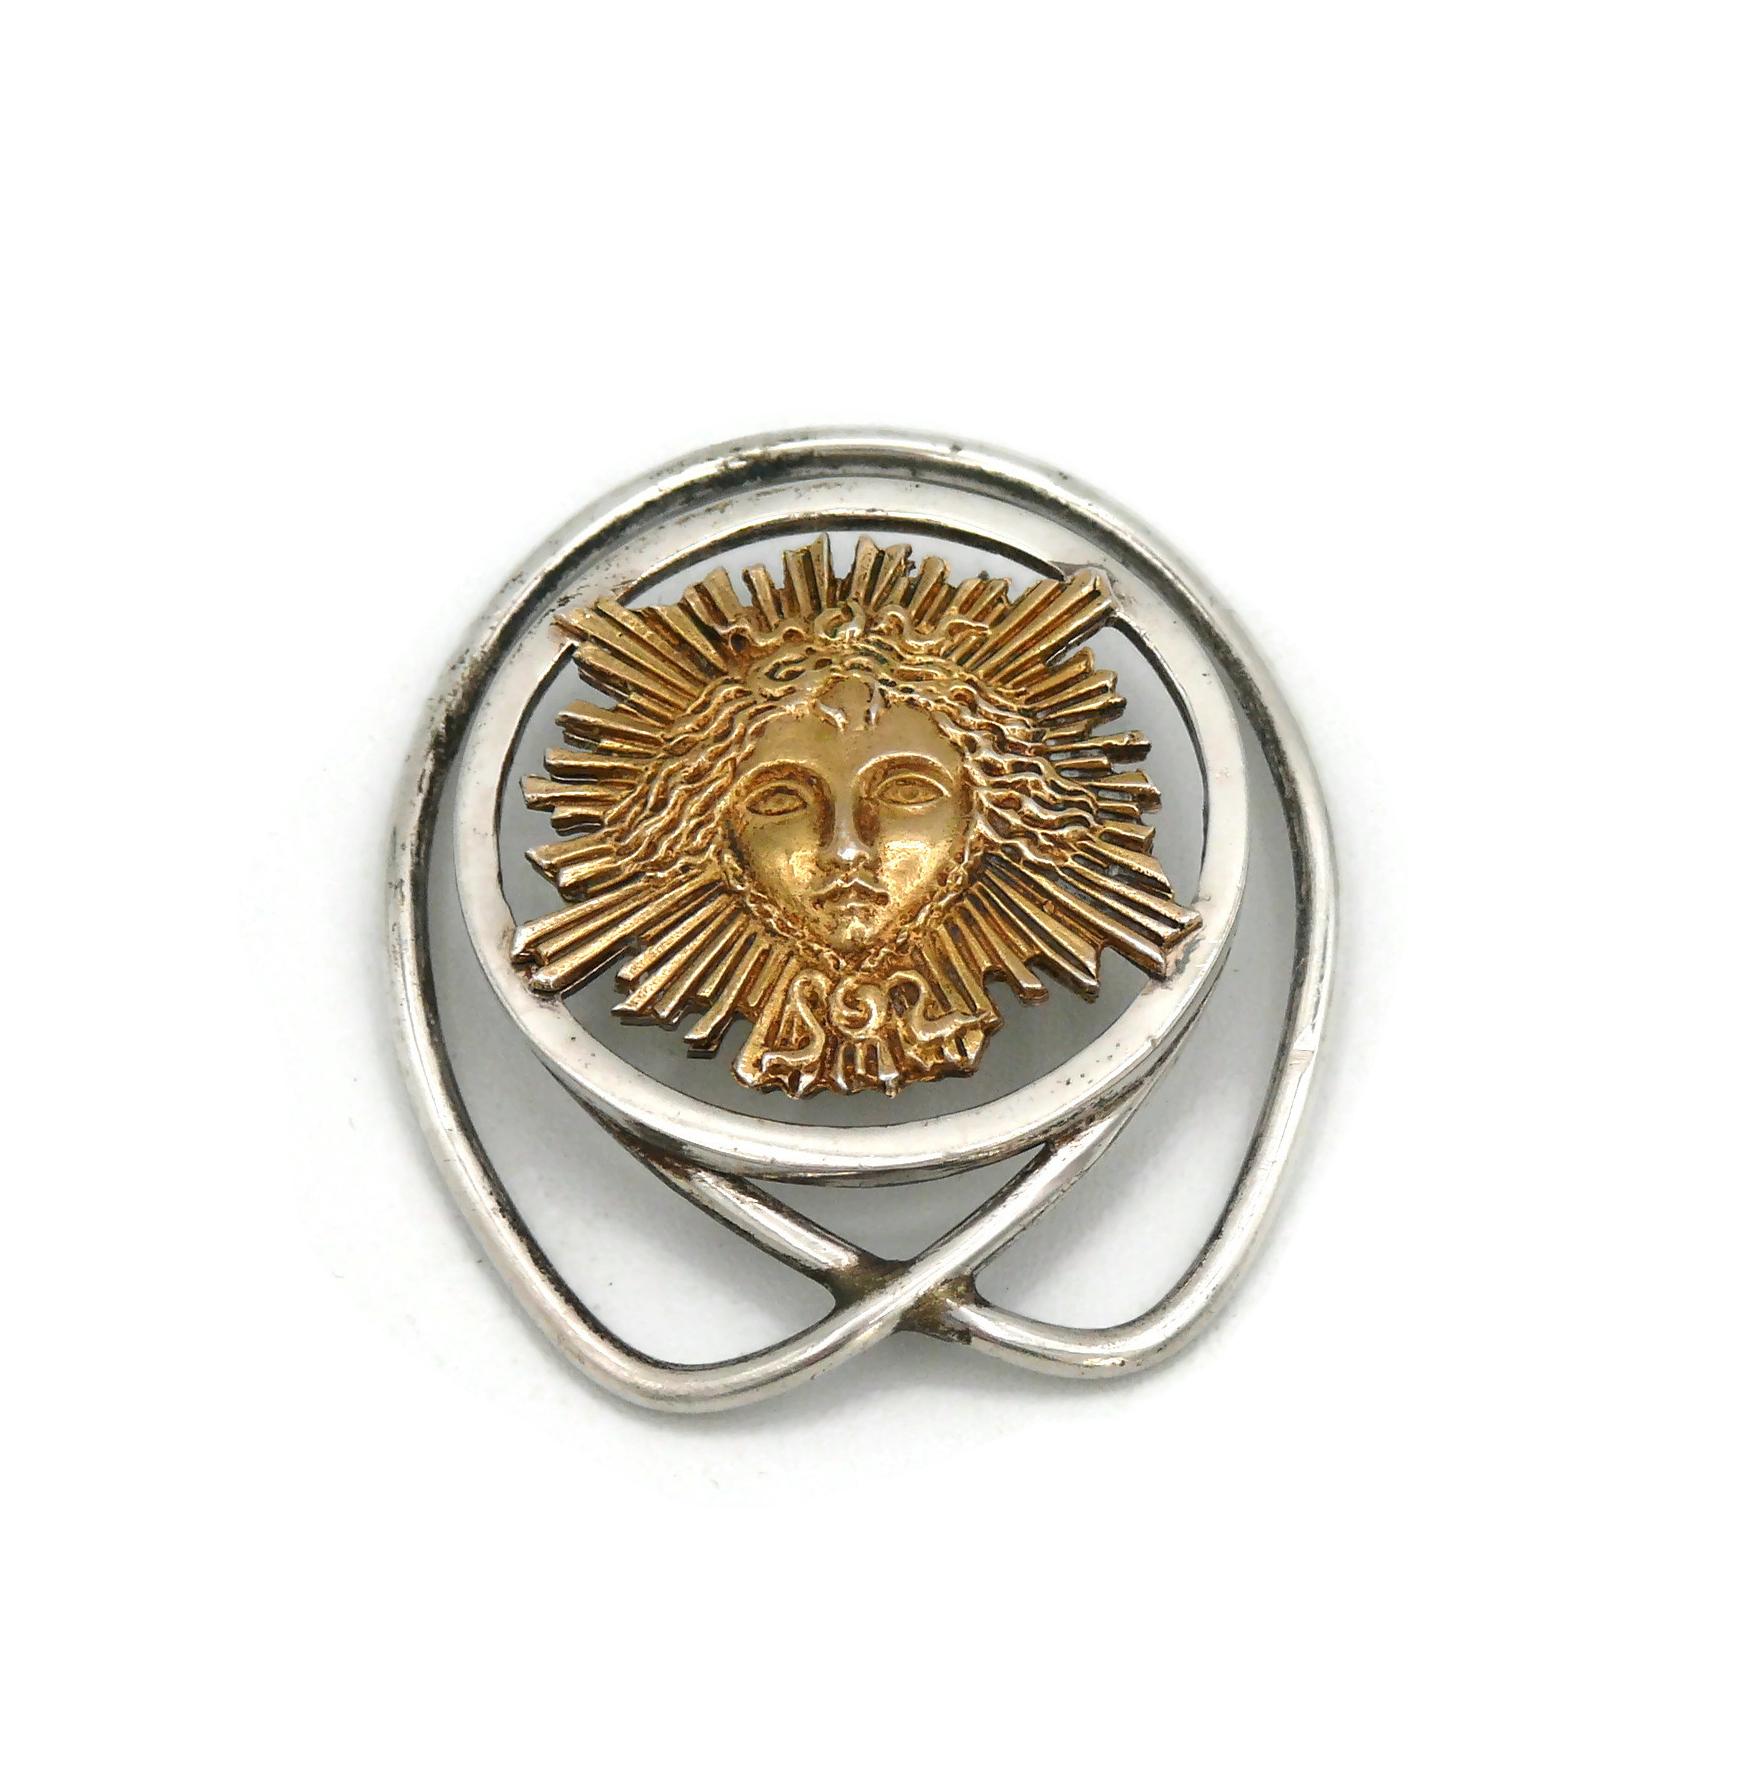 HERMES vintage silver money clip featuring a gilted silver emblem of the Sun King Louis XIV.

Embossed HERMES.
French silver 